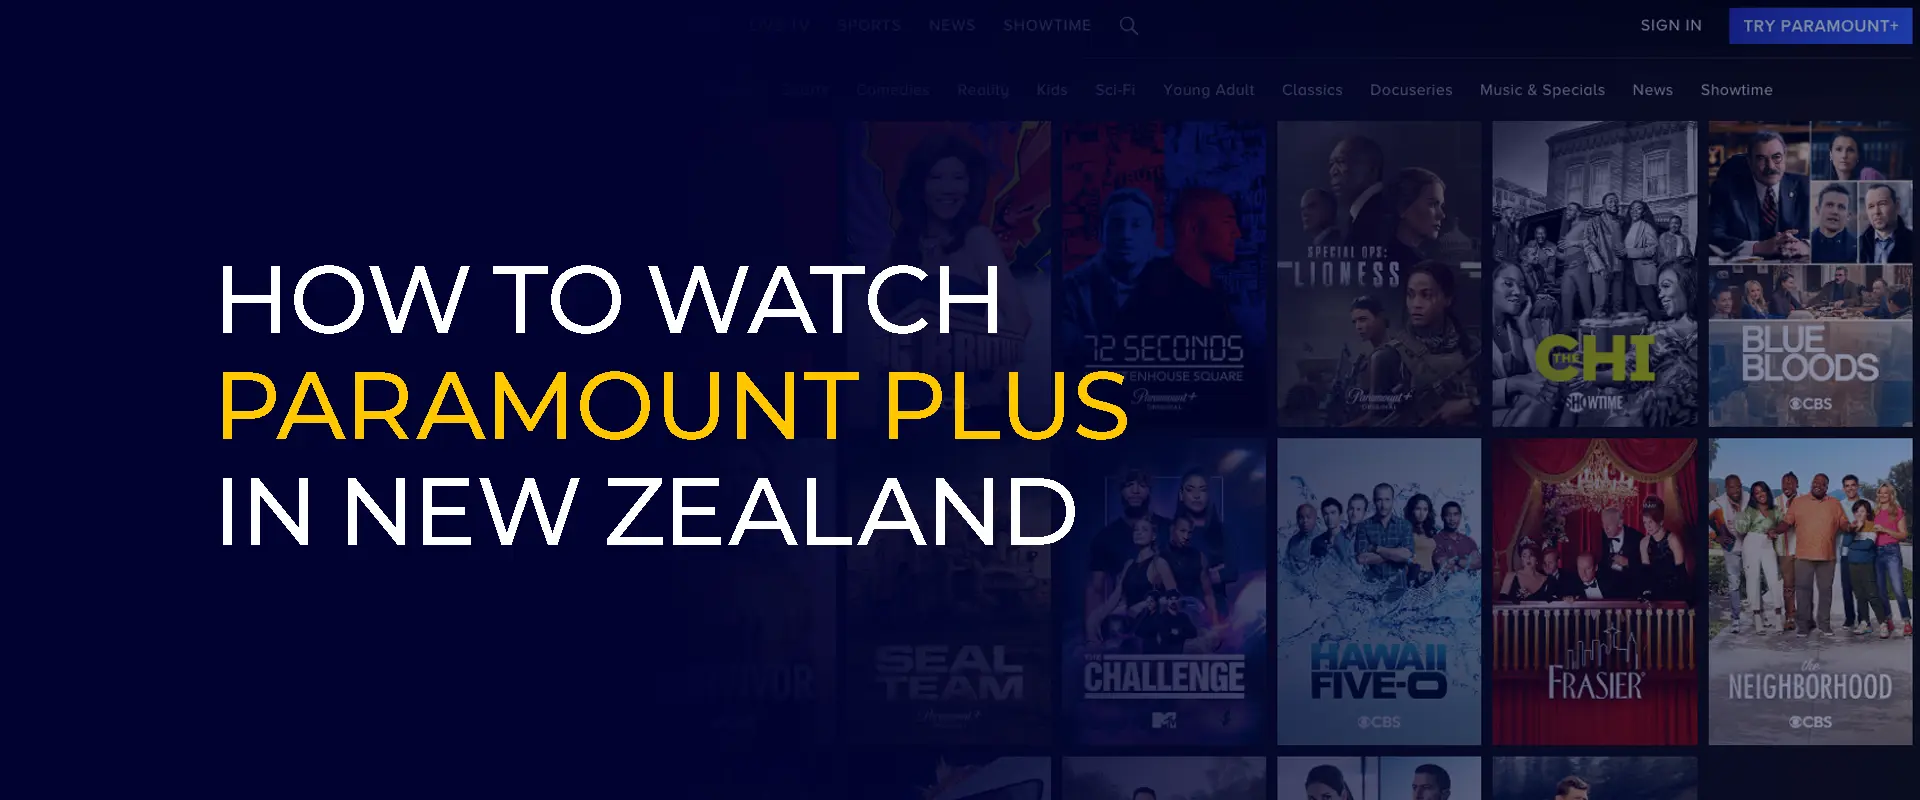 How to Watch Paramount Plus in New Zealand